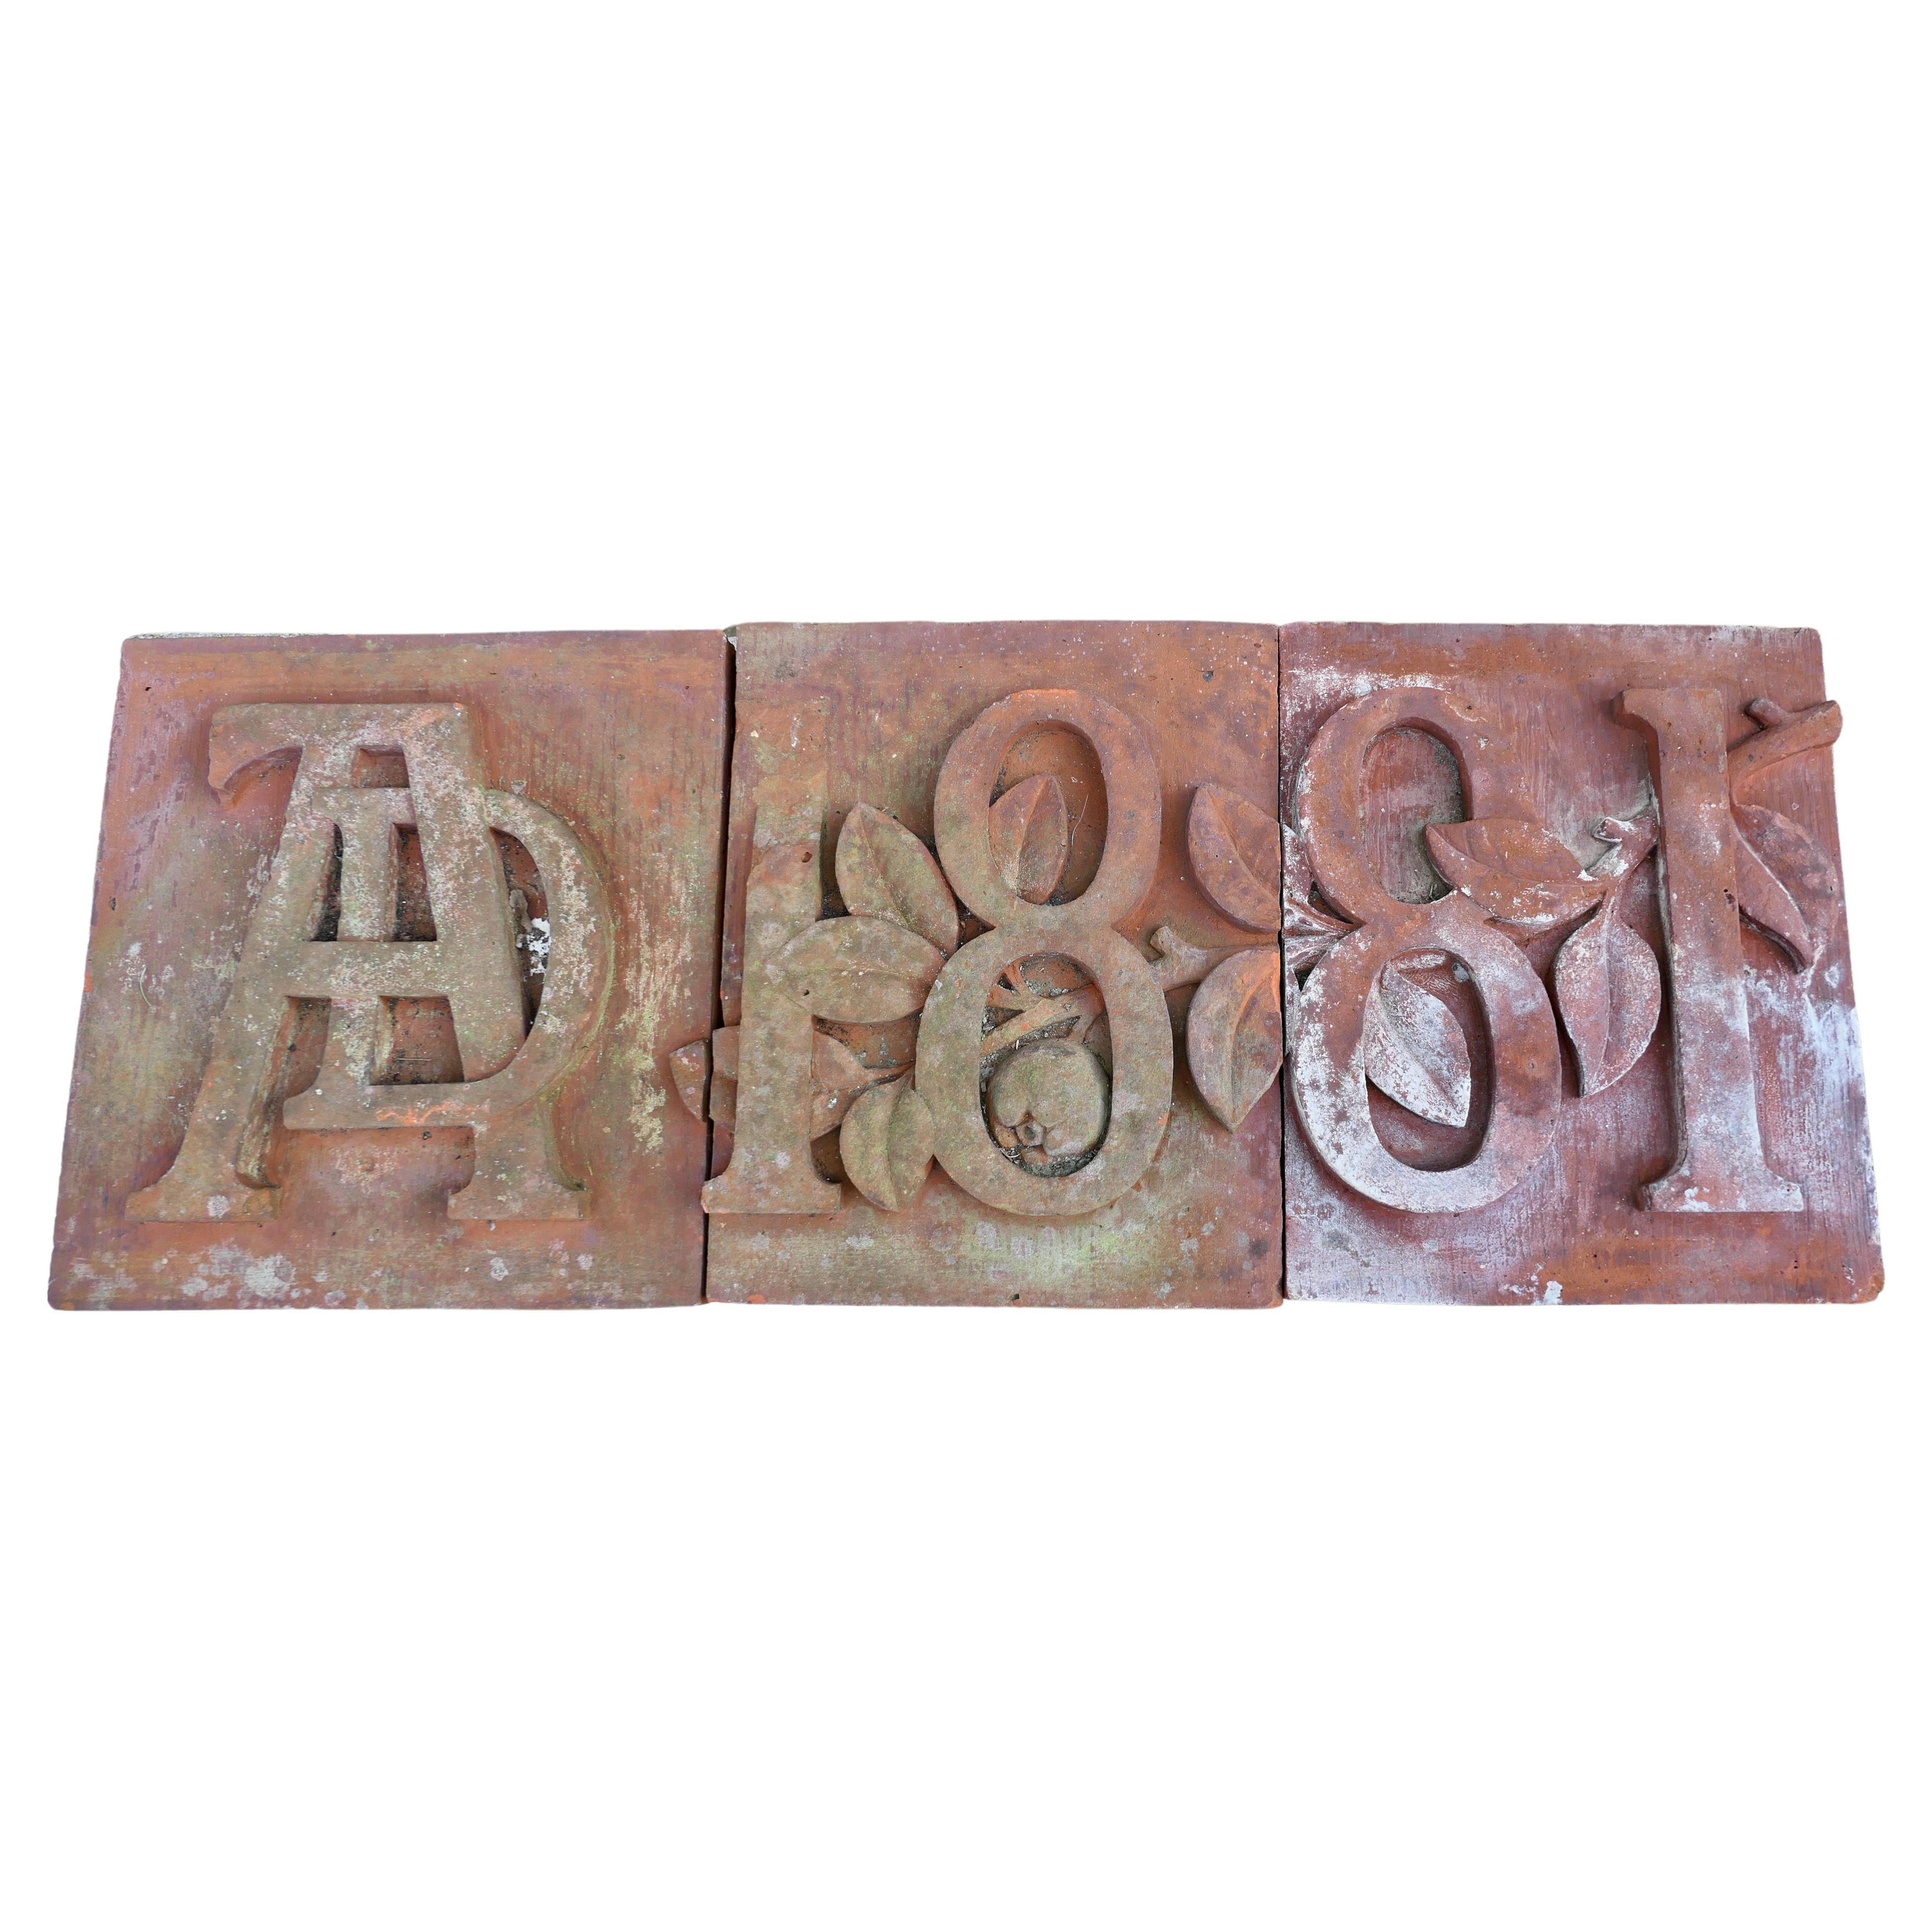 3 Hand Made Terracotta Foundation Stones AD1881 For Sale